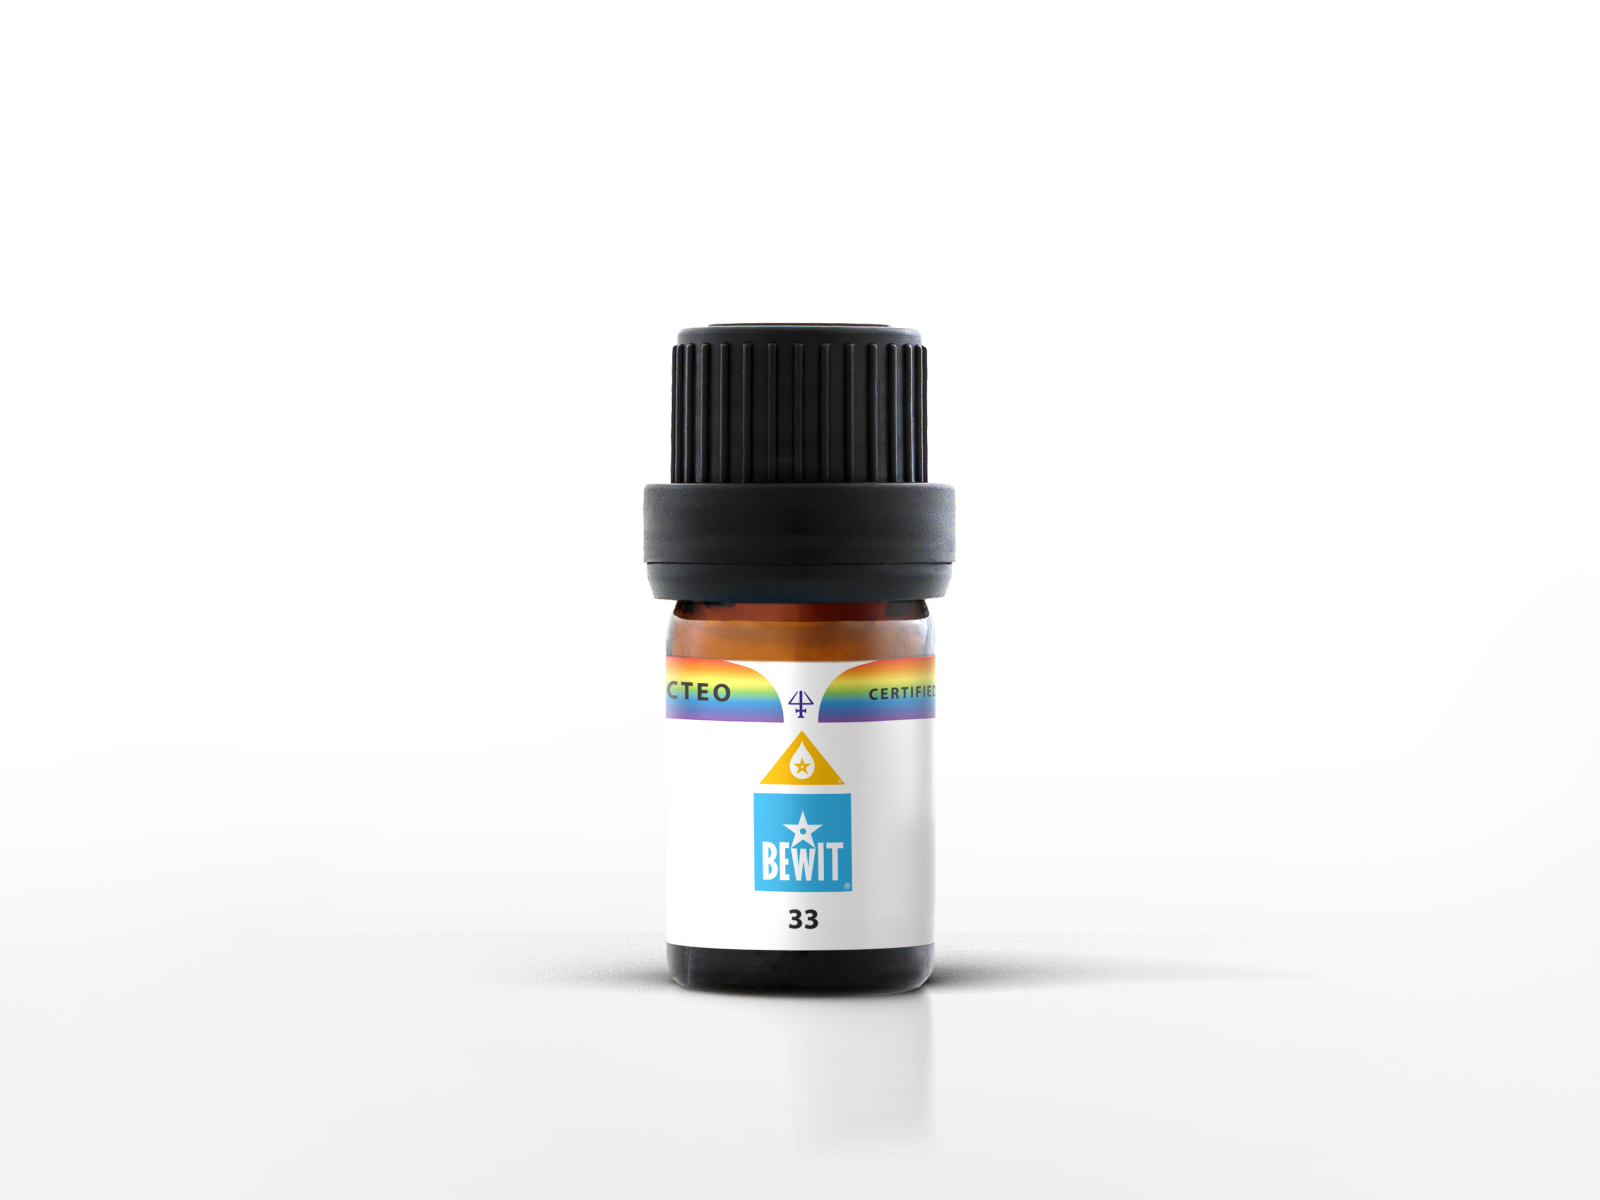 BEWIT 33 - Blend of the essential oils - 2